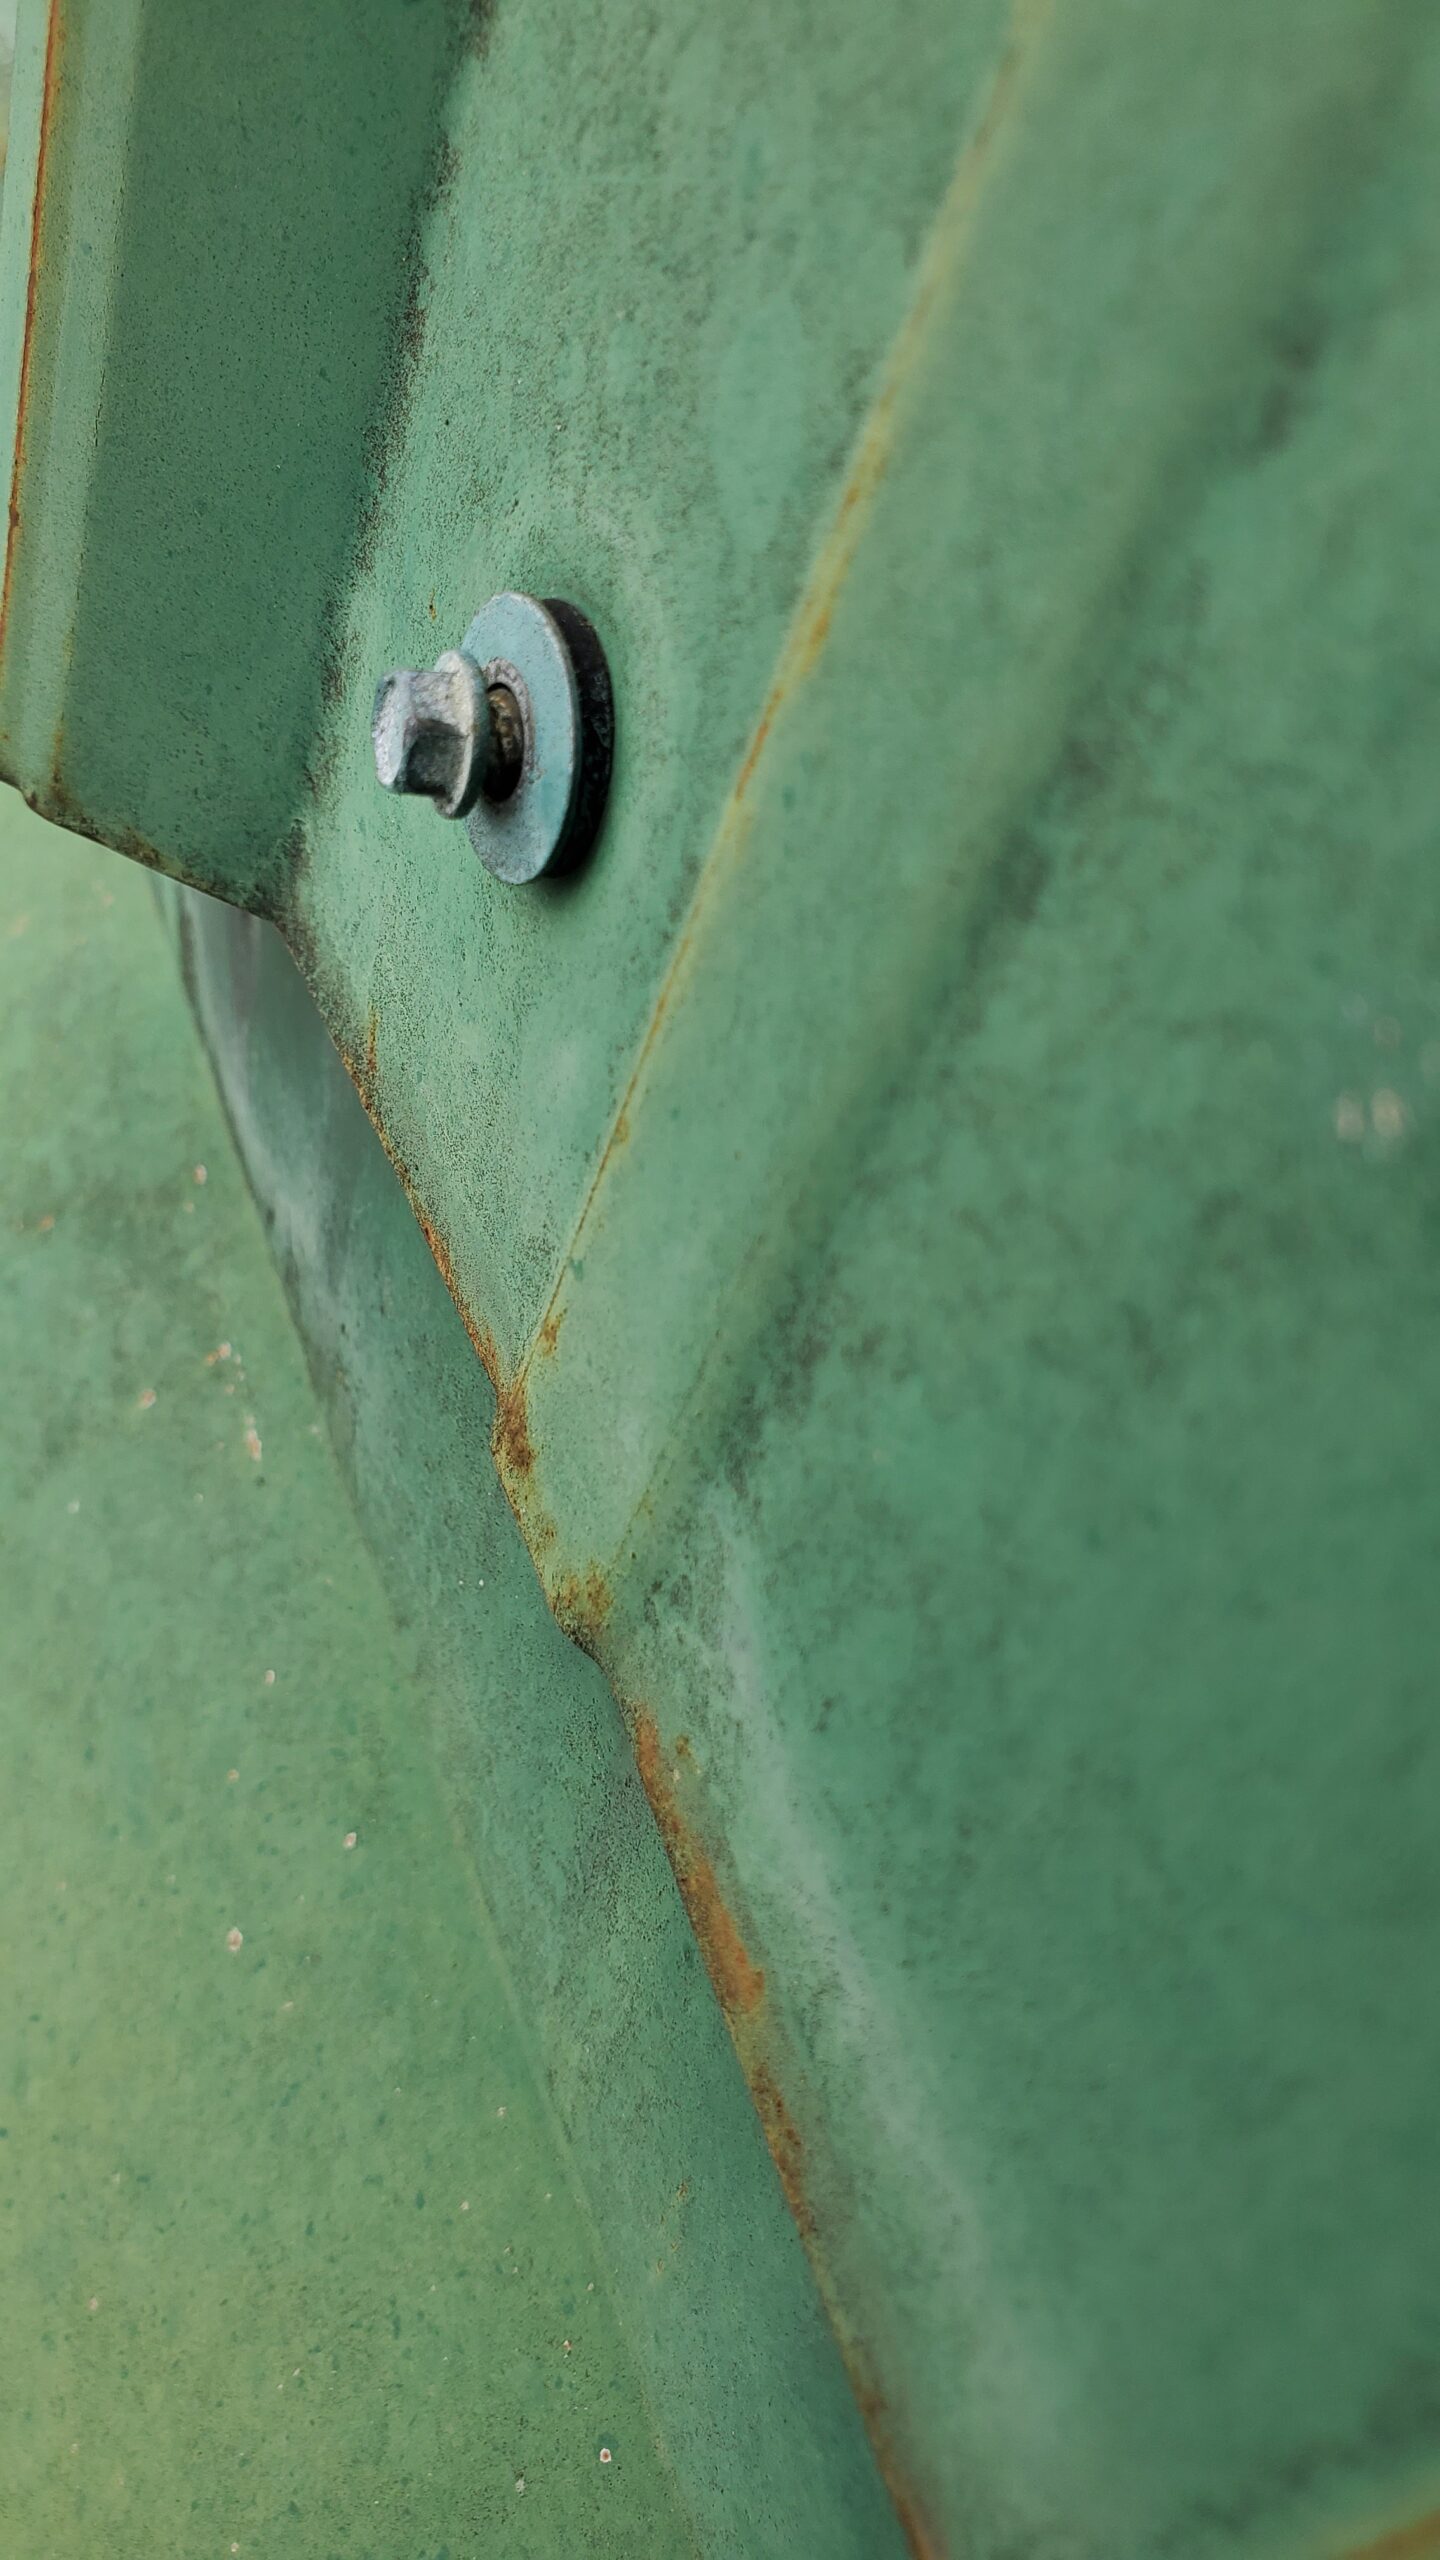 This is a up close picture of a green metal roof with a screw backing out of the metal roof